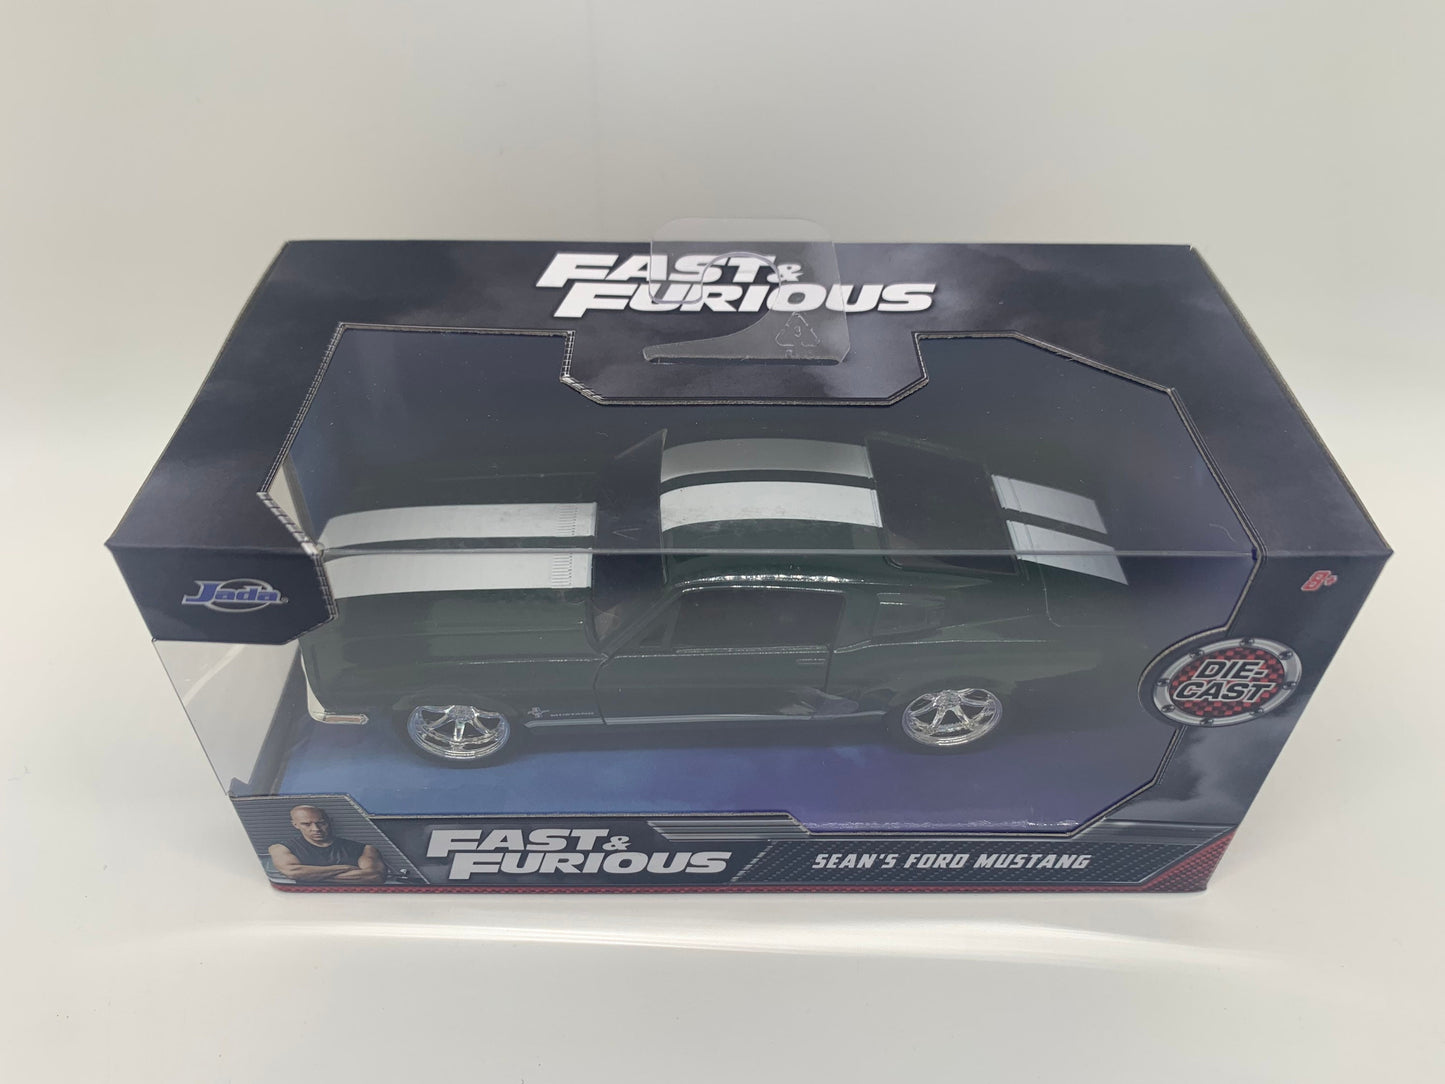 Sean’s Ford Mustang Green and White Diecast 1/43 Scale Model Toy Car JadaToys